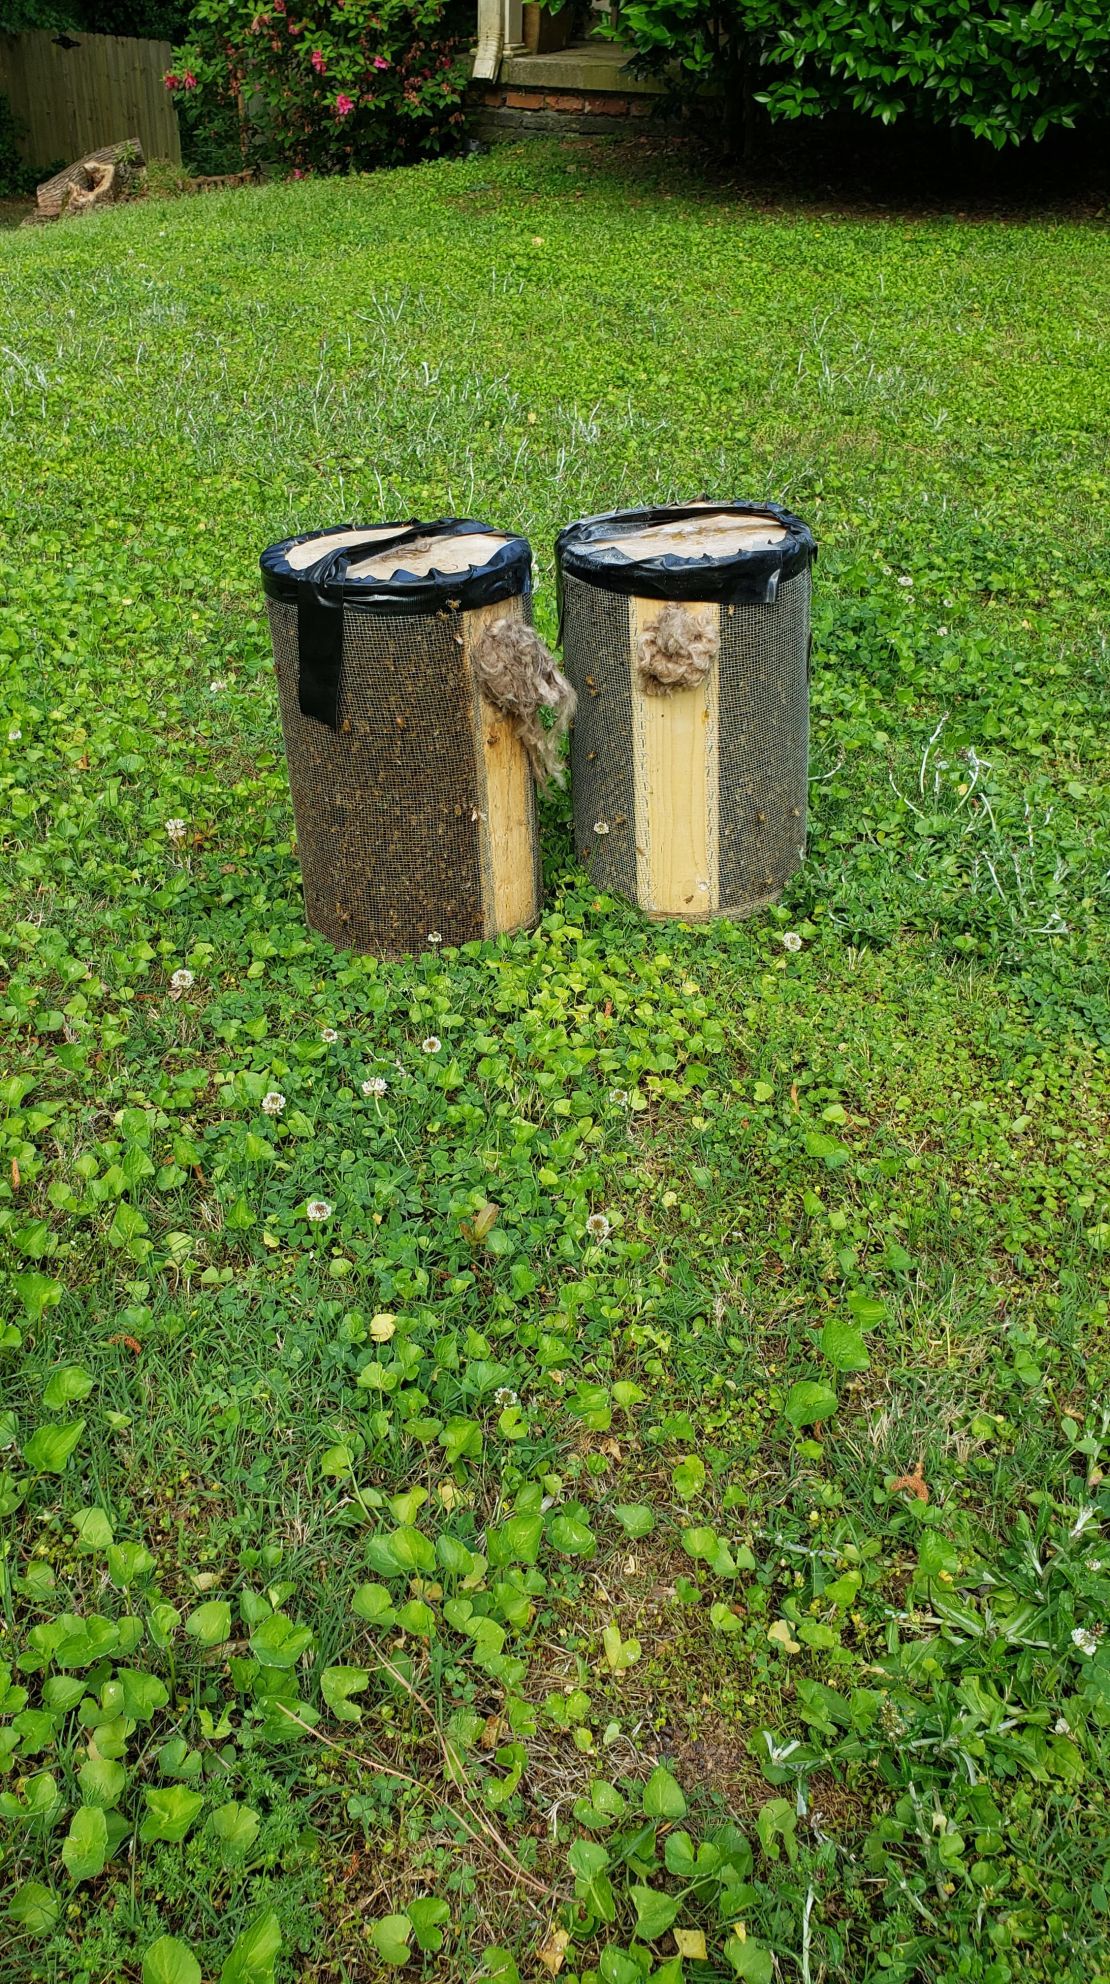 There were two containers full of the bees after Georgia Bee Removal took care of the insects. 